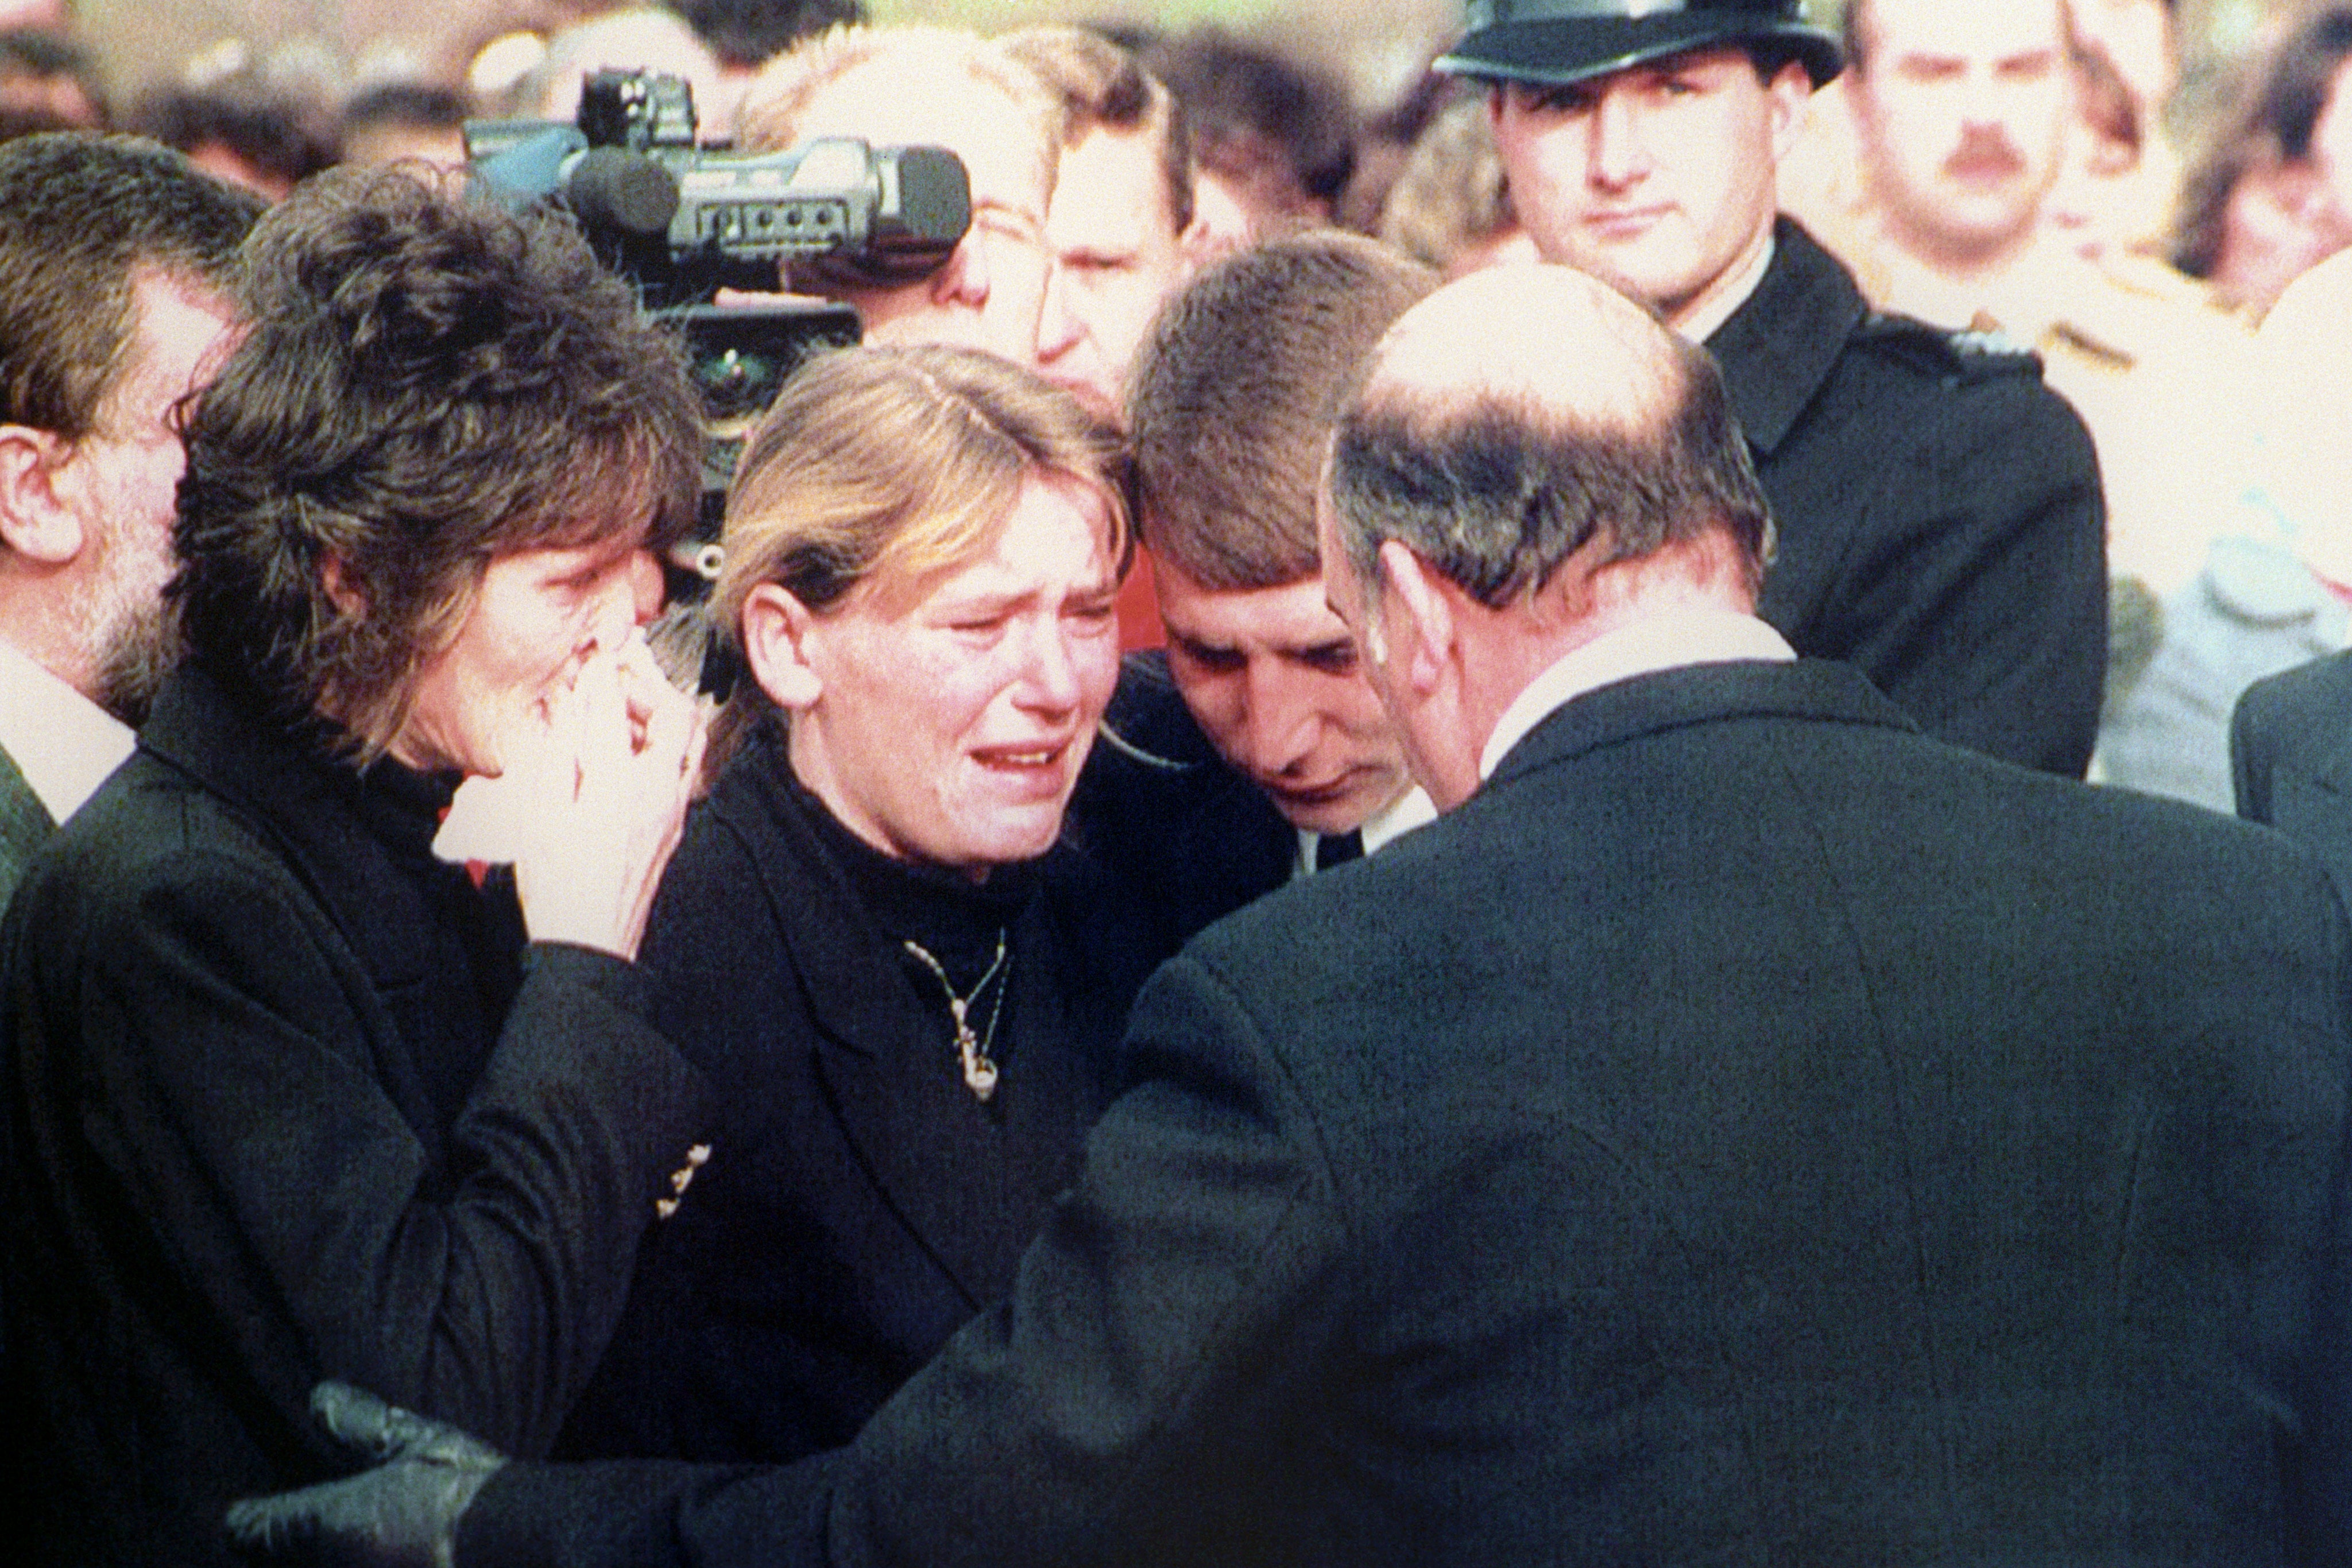 An emotional Sharon Priest at her daughter’s funeral after she was murdered in 1992